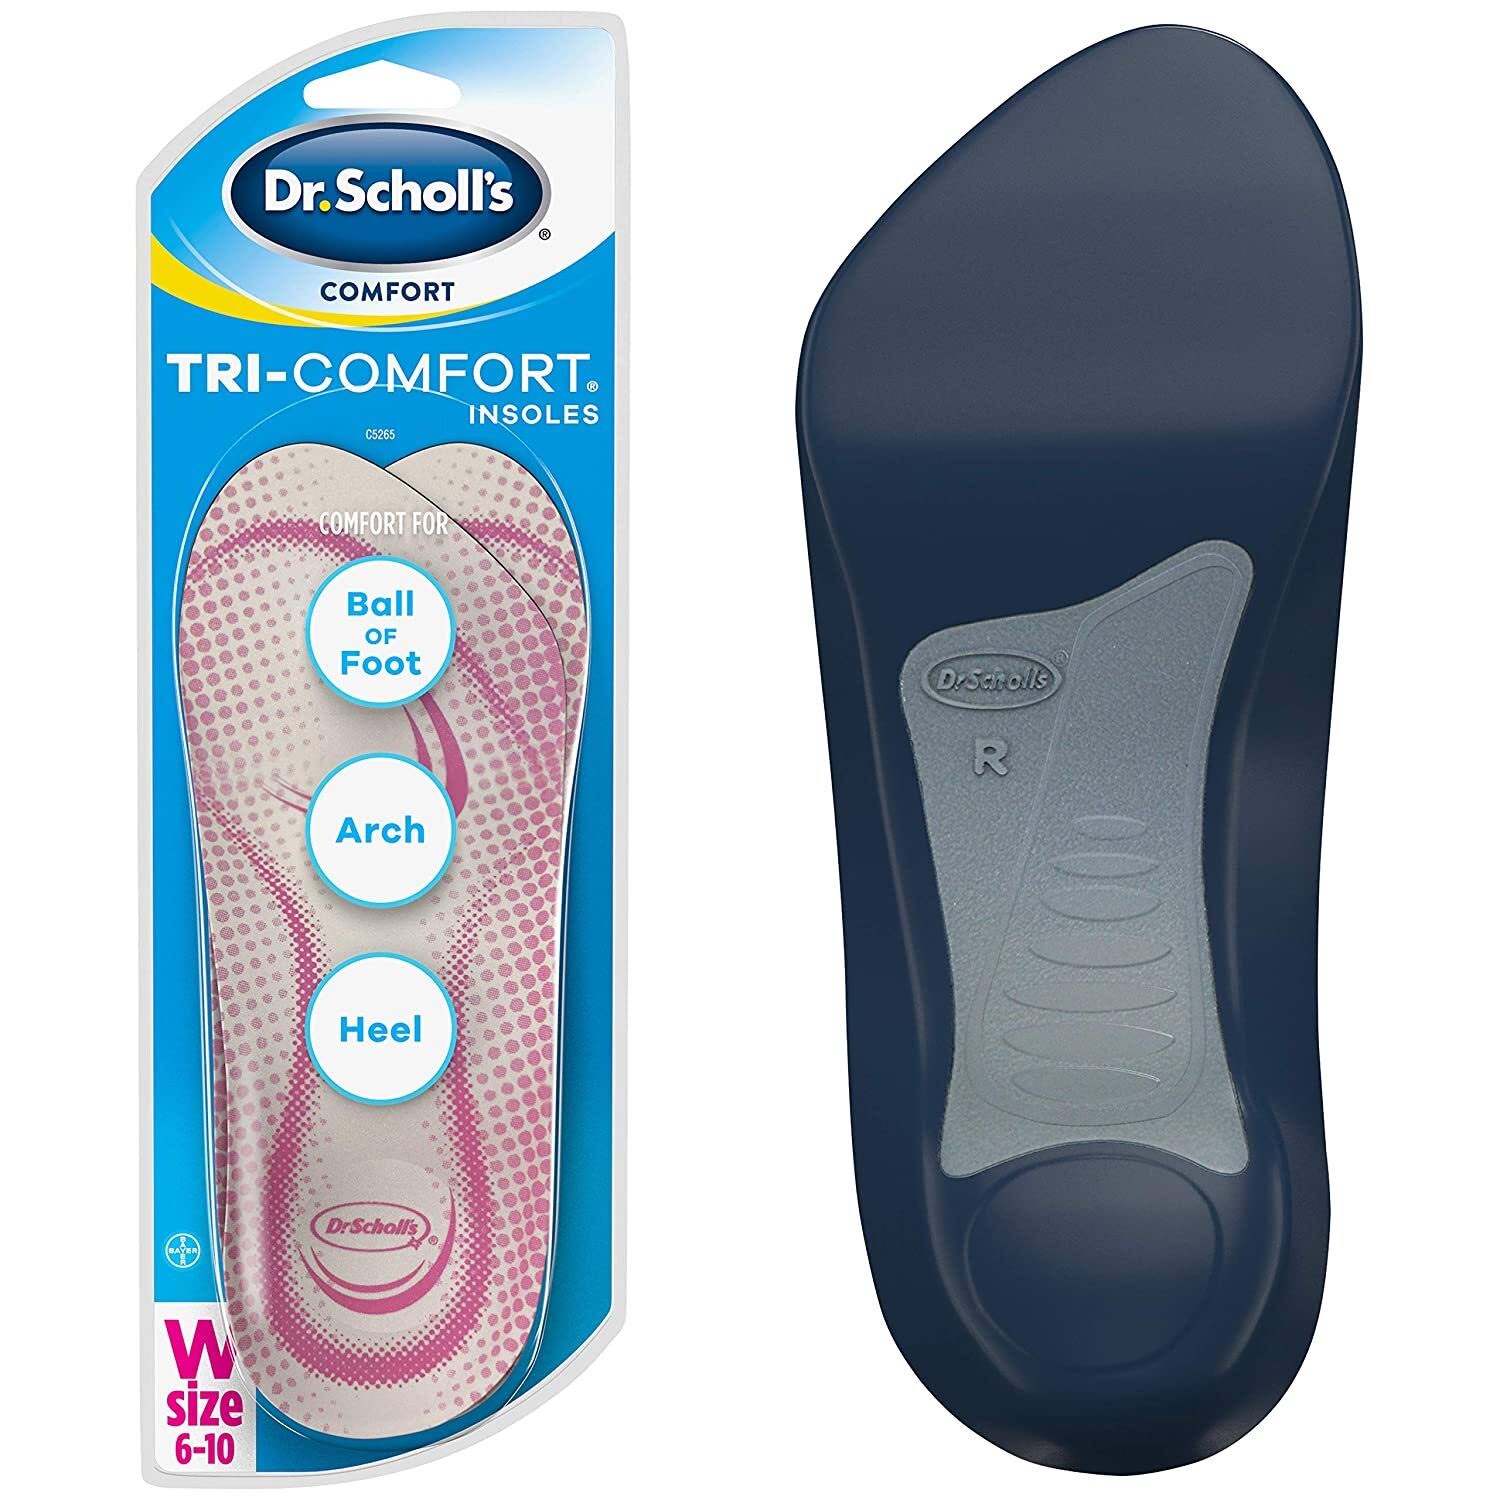 Dr. Scholl's Tri-Comfort Insoles For Women, Size 6-10, 1 Pair